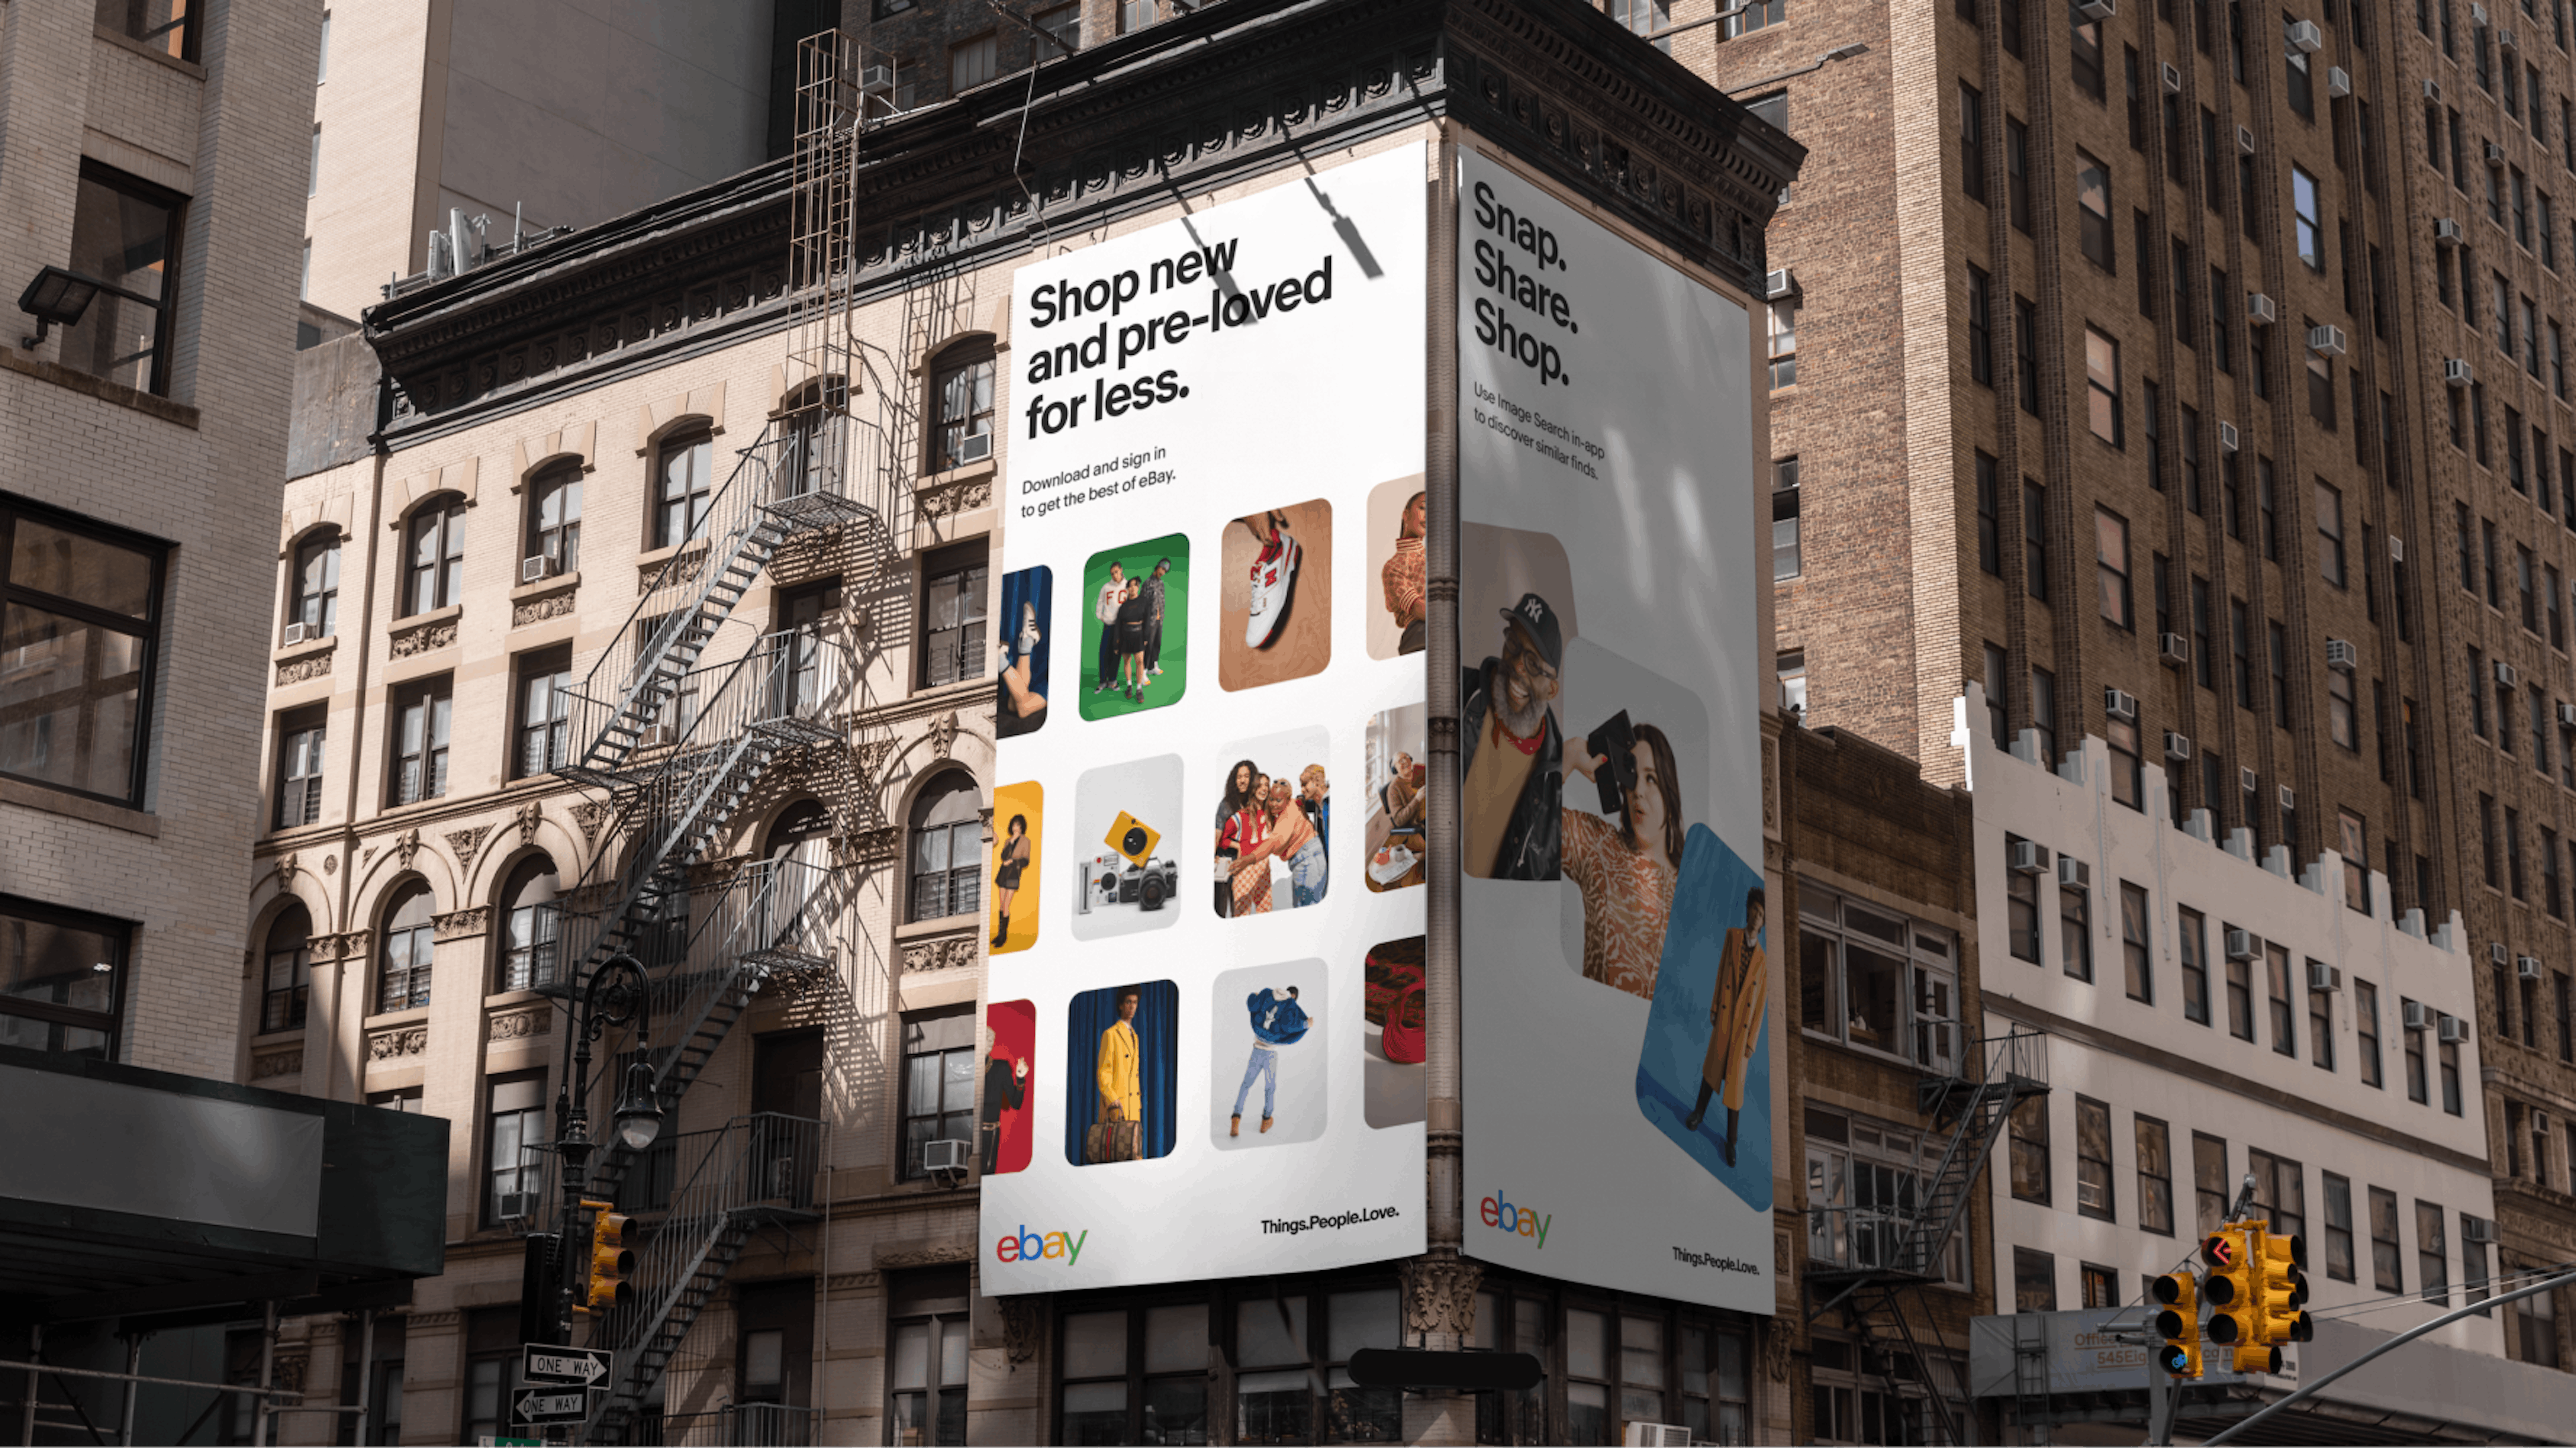 A large billboard advertisement on a building in a city promoting eBay with the text "Shop new and pre-loved for less" and "Snap. Share. Shop." The billboard features images of various products and people, encouraging viewers to download and sign in to the eBay app.